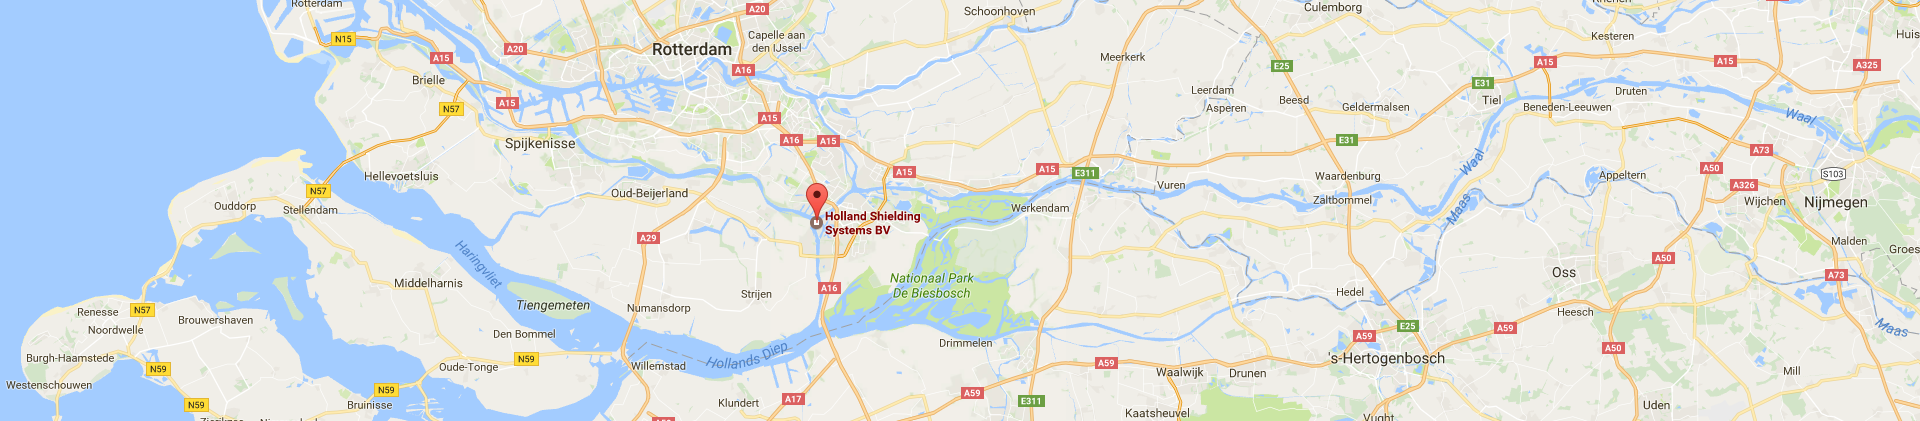 Location of Holland Shielding Systems B.V. on map